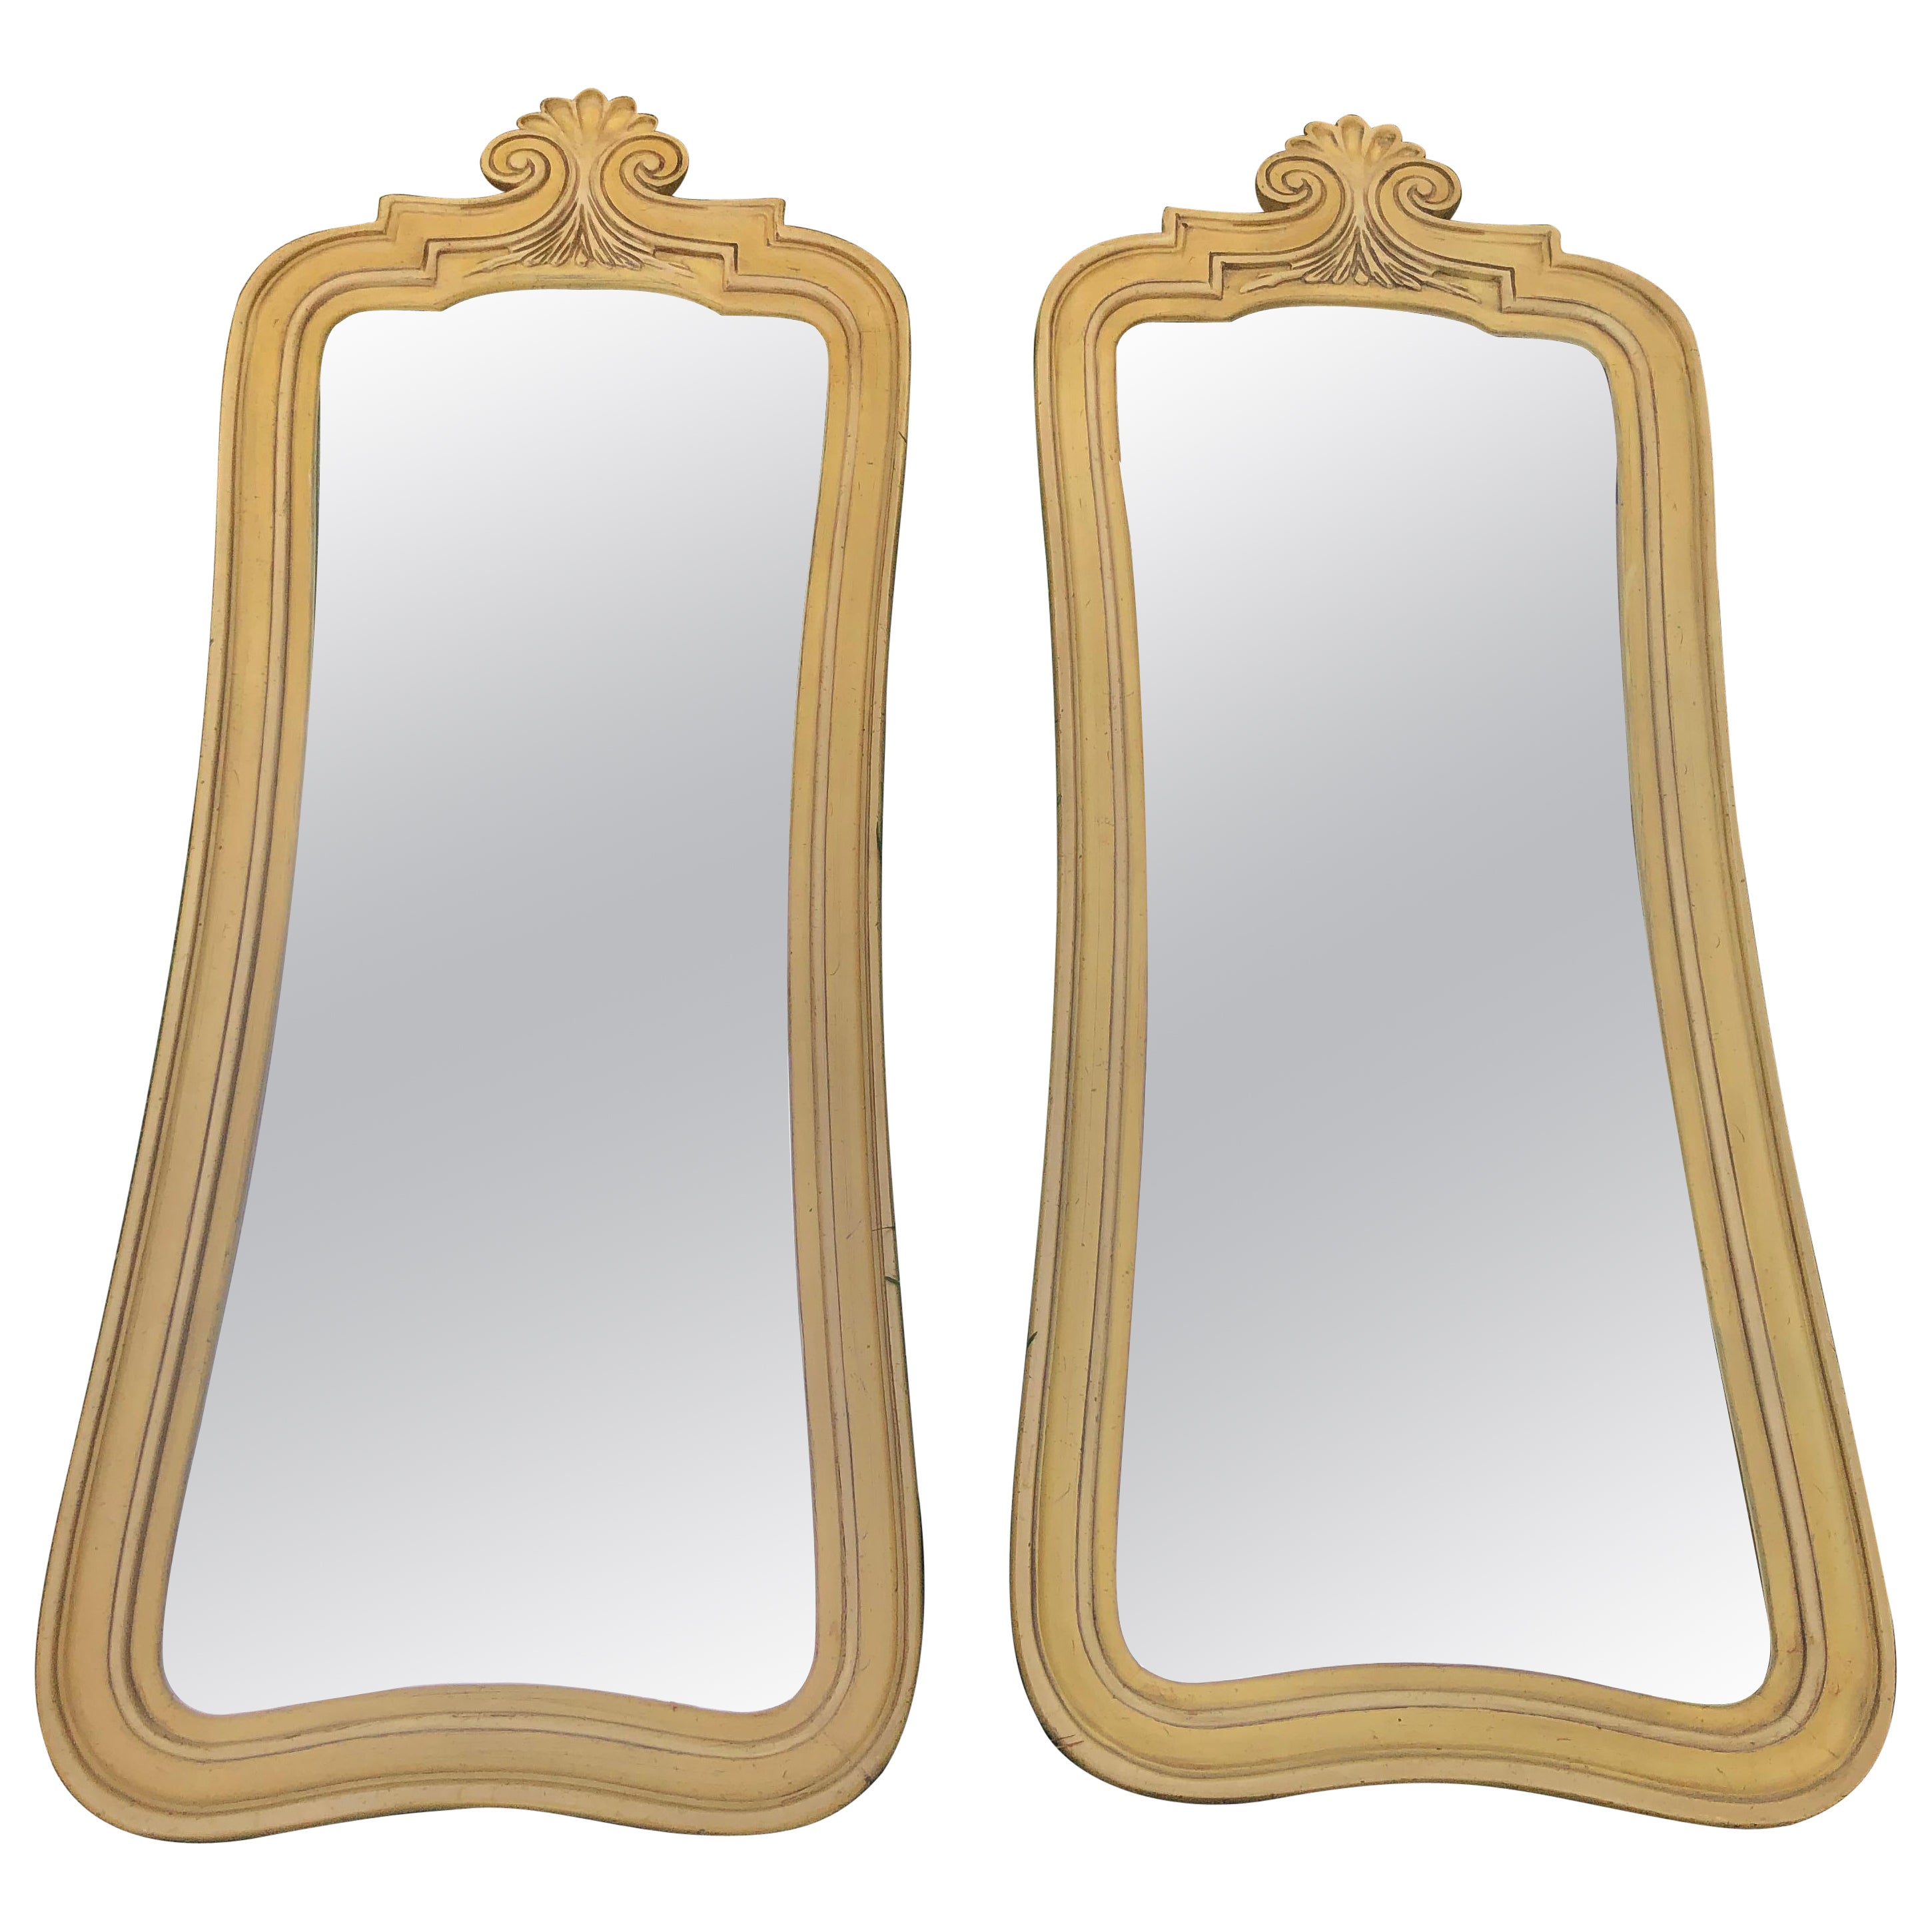 Wonderful Pair Tall French Provincial Wall Mirrors Hollywood Regency For Sale